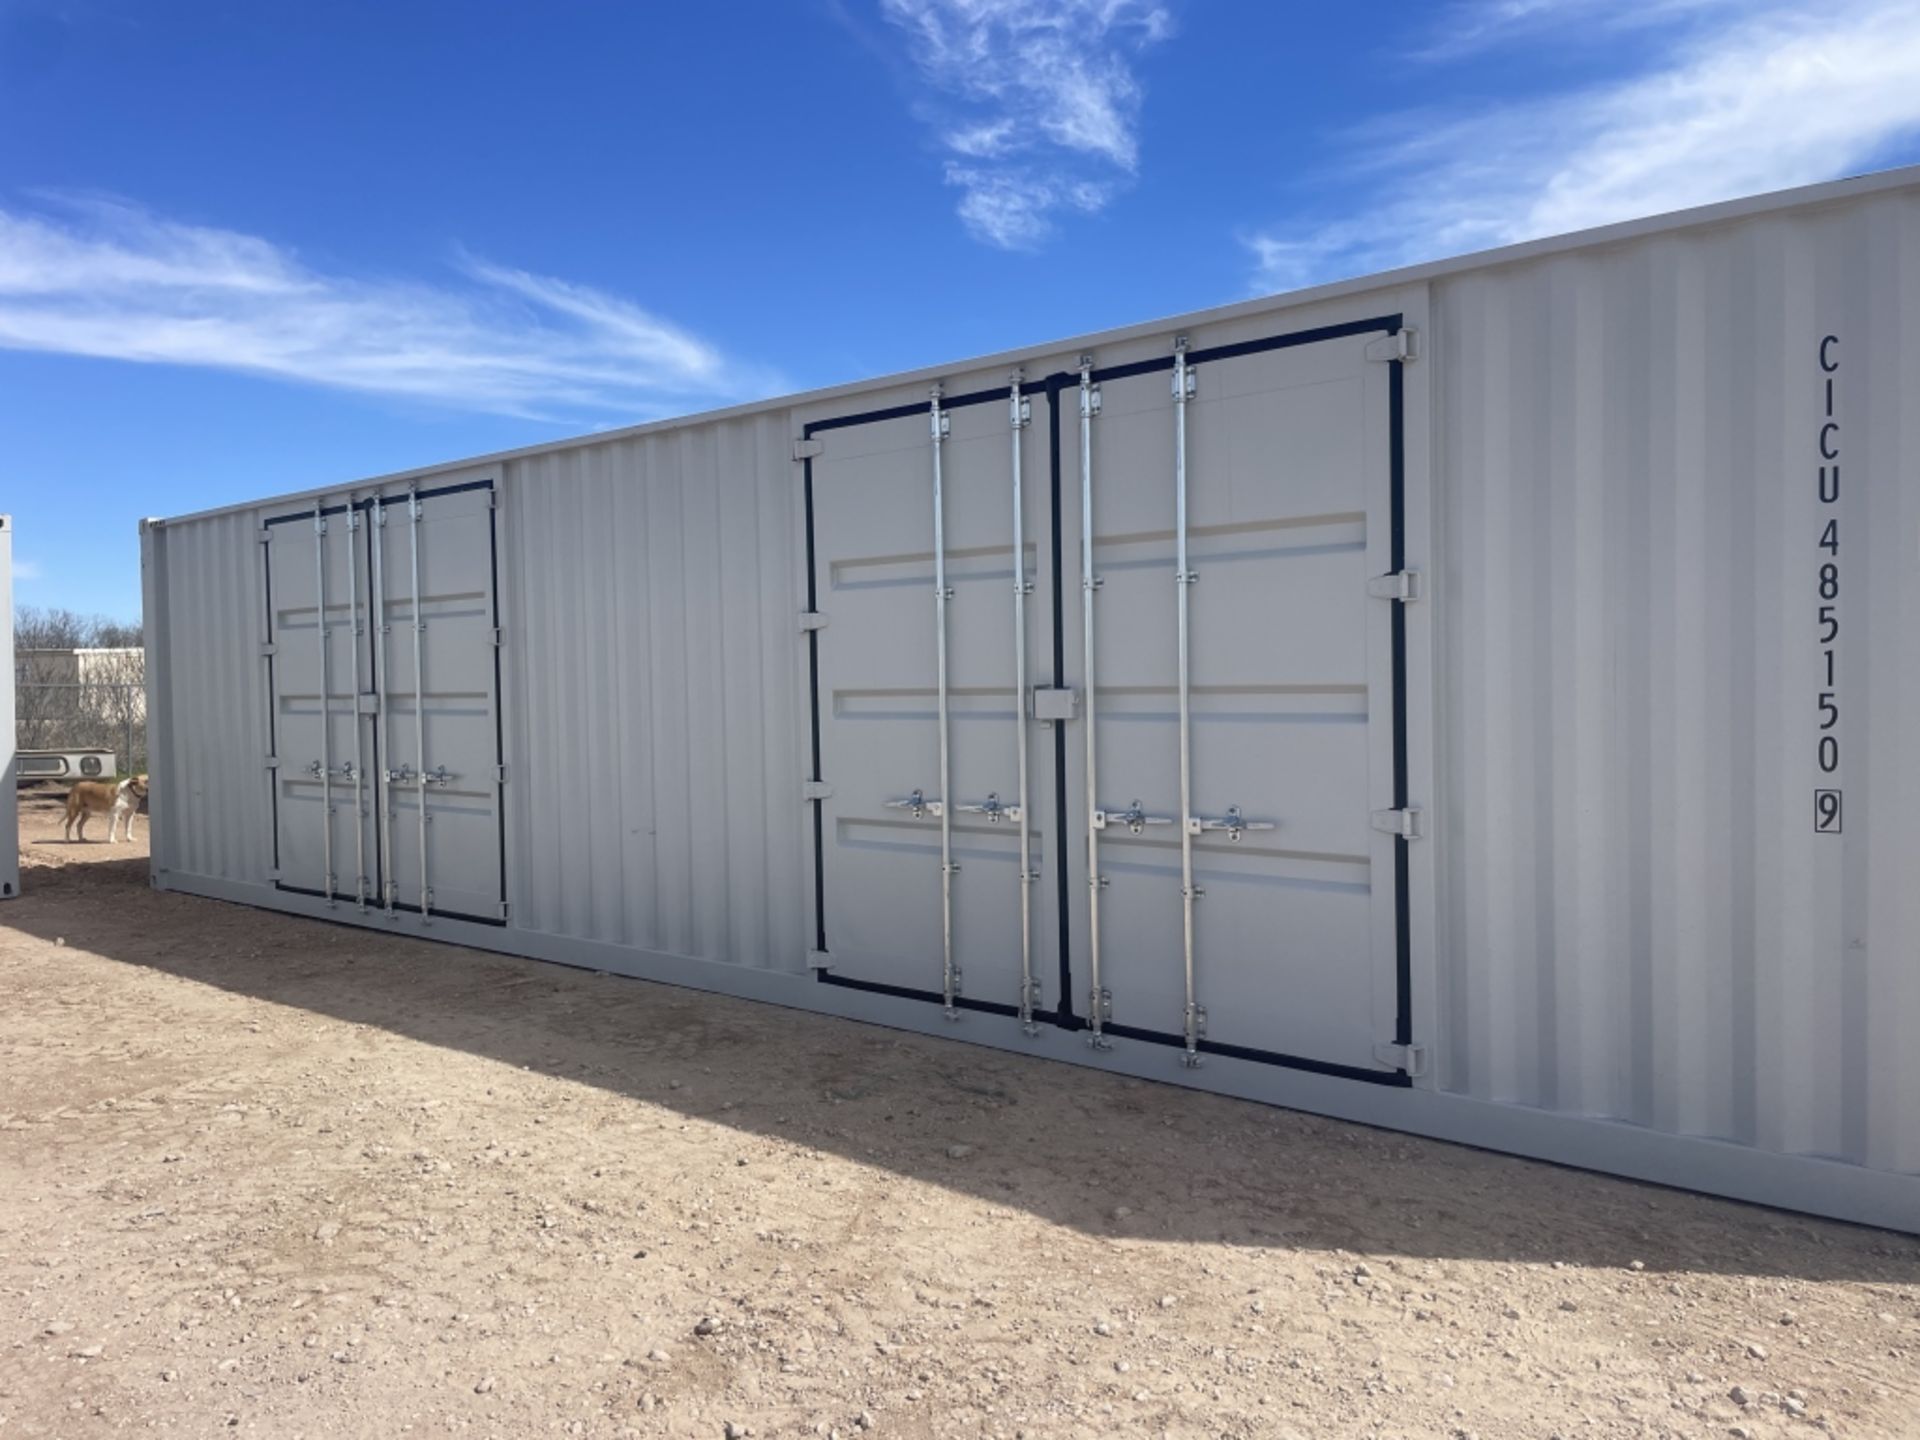 40’ one trip container w/2 side doors. CICU4851509 - Image 2 of 8